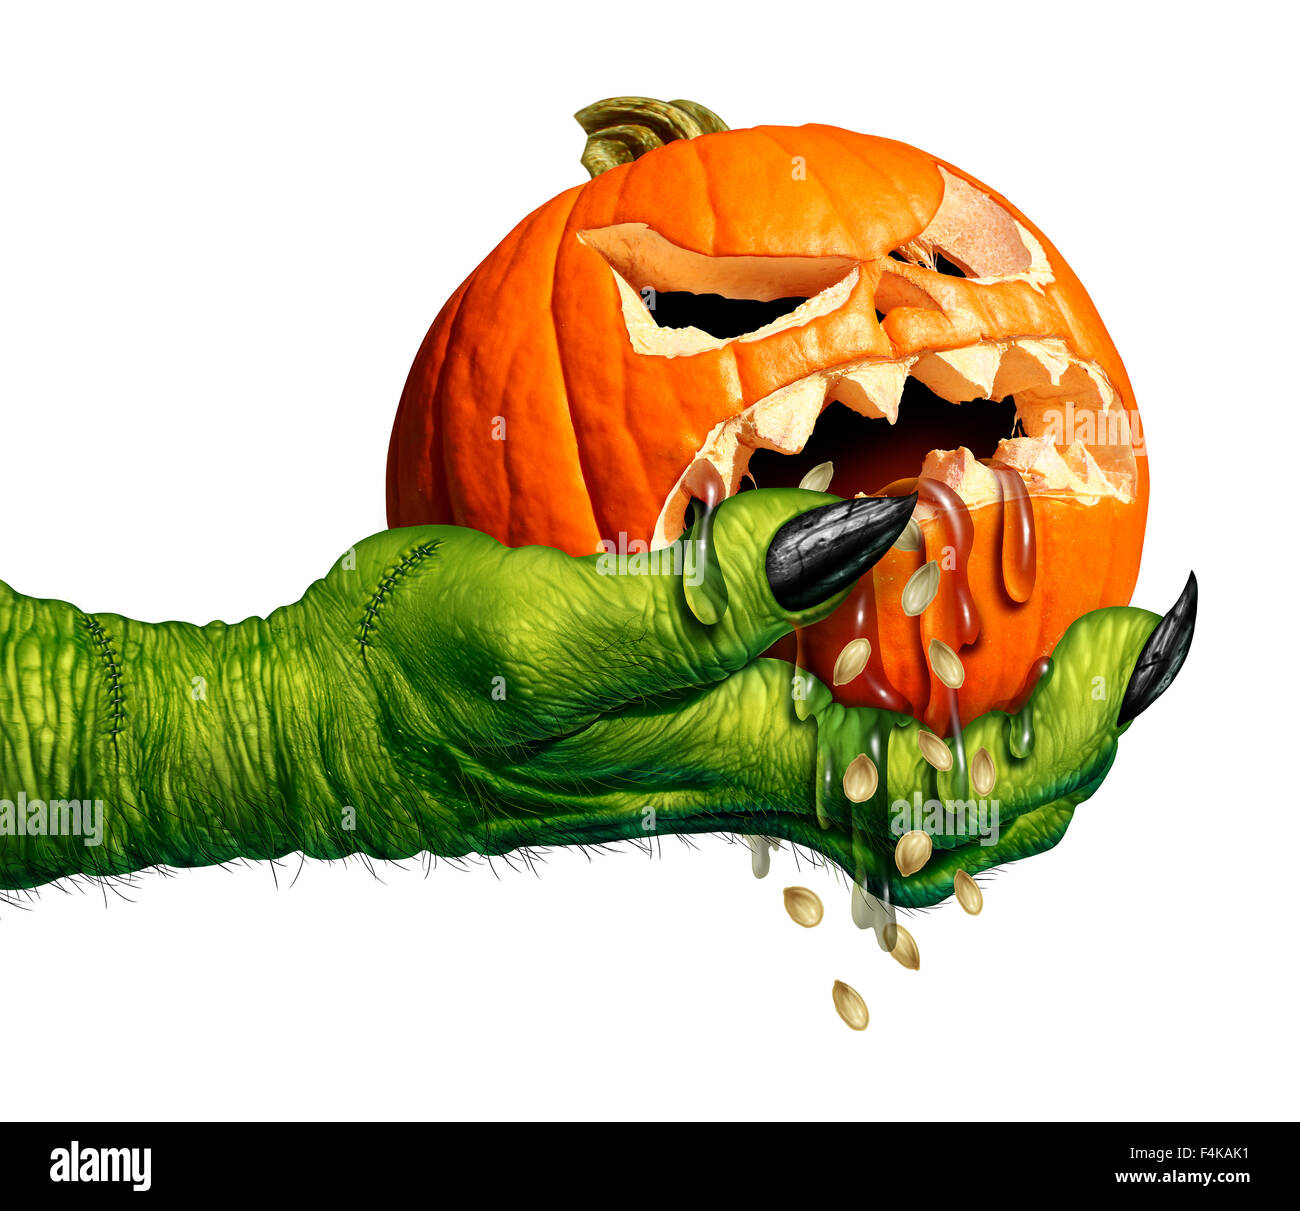 Monster hand holding a creepy pumpkin head jack o lantern that is dripping eerie liquid as a halloween symbol for horror and weird seasonal ritual on a white background. Stock Photo